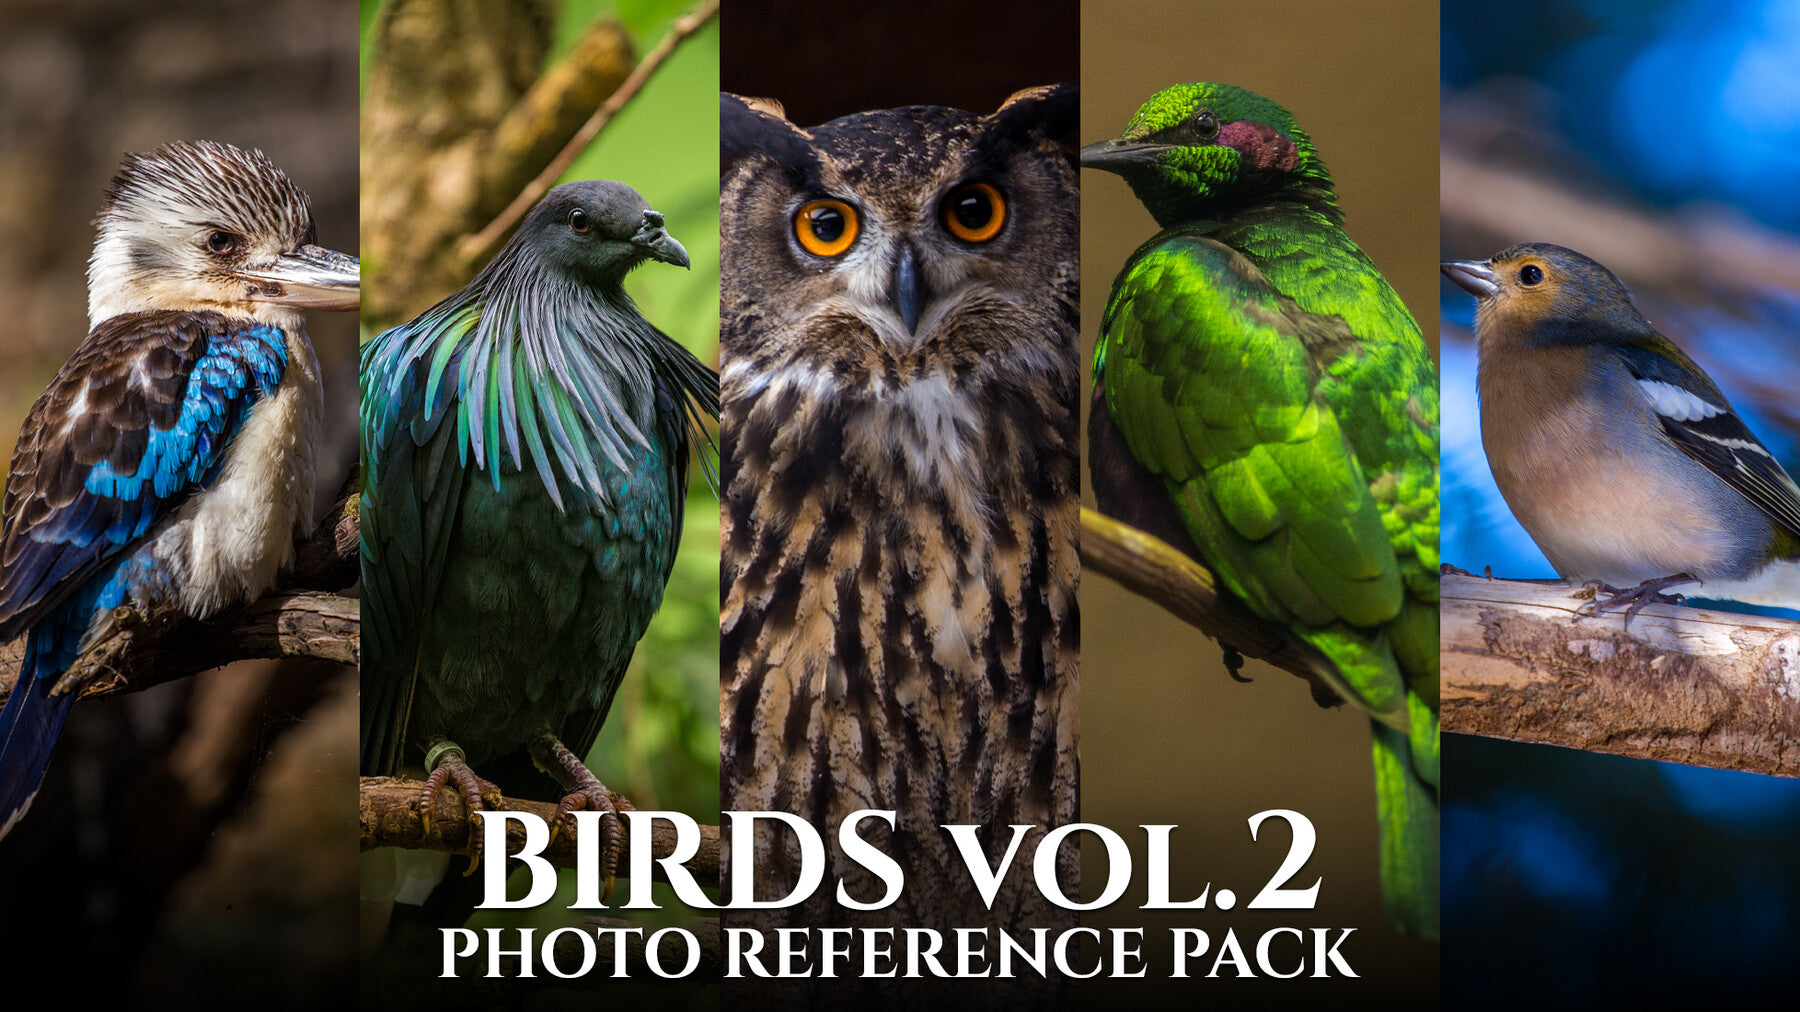 Birds Vol.2 - Photo Reference Pack For Artists 450 JPEGs